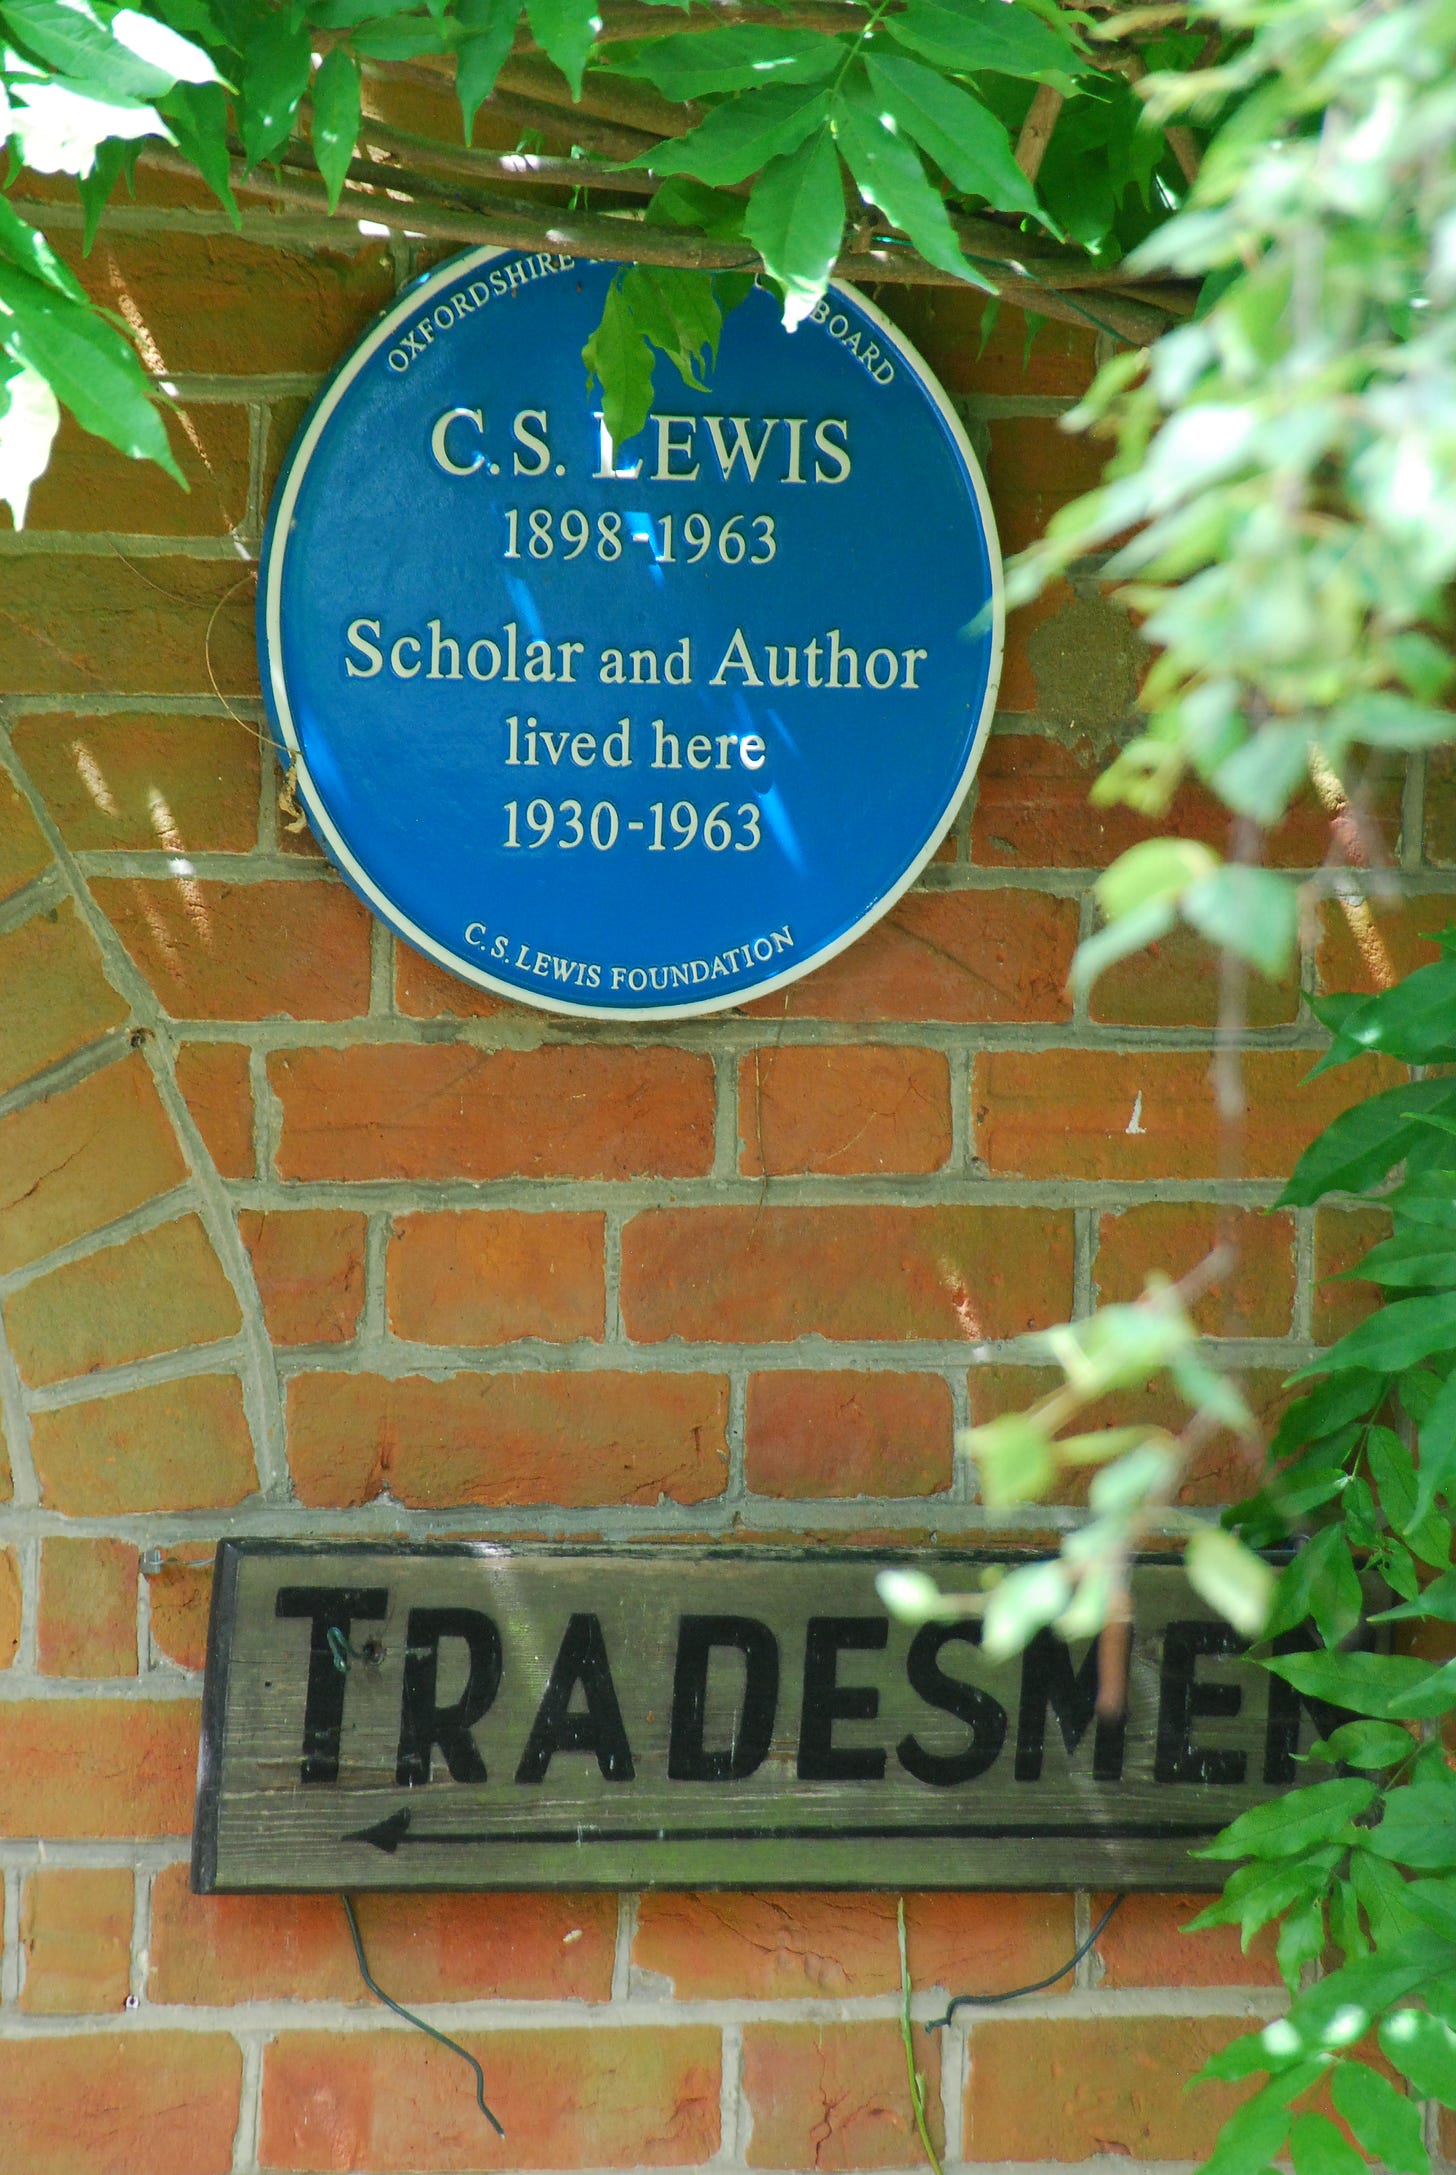 The blue plaque reads: “CS Lewis 1898-1963, Scholar and Author lived here 1930-1963”